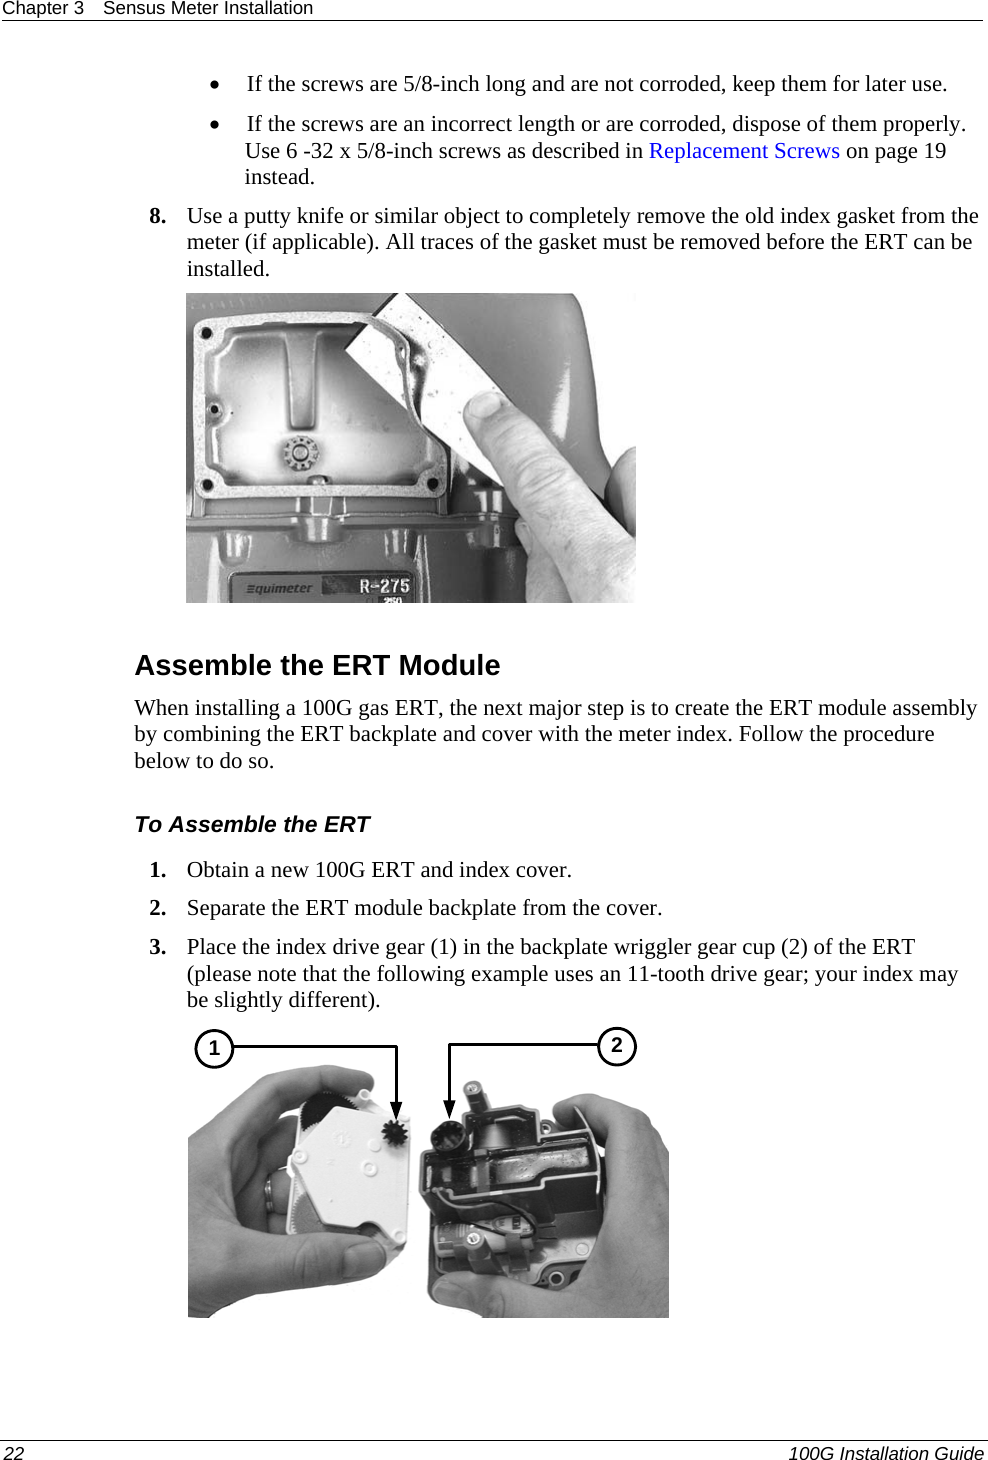 Chapter 3  Sensus Meter Installation  • If the screws are 5/8-inch long and are not corroded, keep them for later use.  • If the screws are an incorrect length or are corroded, dispose of them properly. Use 6 -32 x 5/8-inch screws as described in Replacement Screws on page 19 instead.  8. Use a putty knife or similar object to completely remove the old index gasket from the meter (if applicable). All traces of the gasket must be removed before the ERT can be installed.     Assemble the ERT Module When installing a 100G gas ERT, the next major step is to create the ERT module assembly by combining the ERT backplate and cover with the meter index. Follow the procedure below to do so.  To Assemble the ERT 1. Obtain a new 100G ERT and index cover.  2. Separate the ERT module backplate from the cover.  3. Place the index drive gear (1) in the backplate wriggler gear cup (2) of the ERT (please note that the following example uses an 11-tooth drive gear; your index may be slightly different).   12 22   100G Installation Guide  